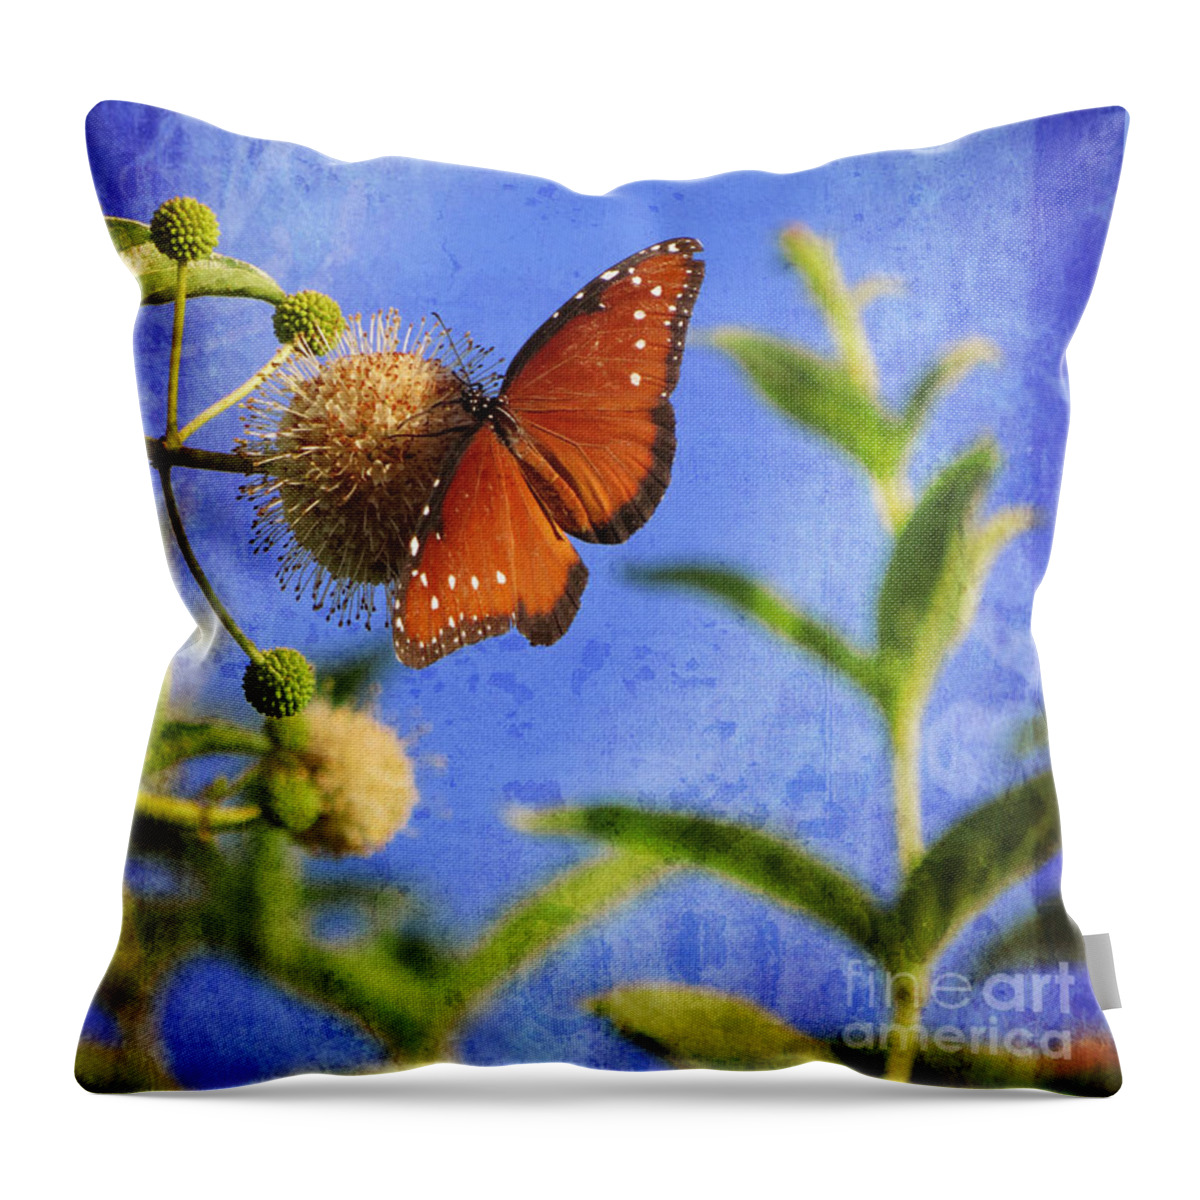 Butterflies Throw Pillow featuring the photograph Butterfly - Bow to the Queen by Ella Kaye Dickey